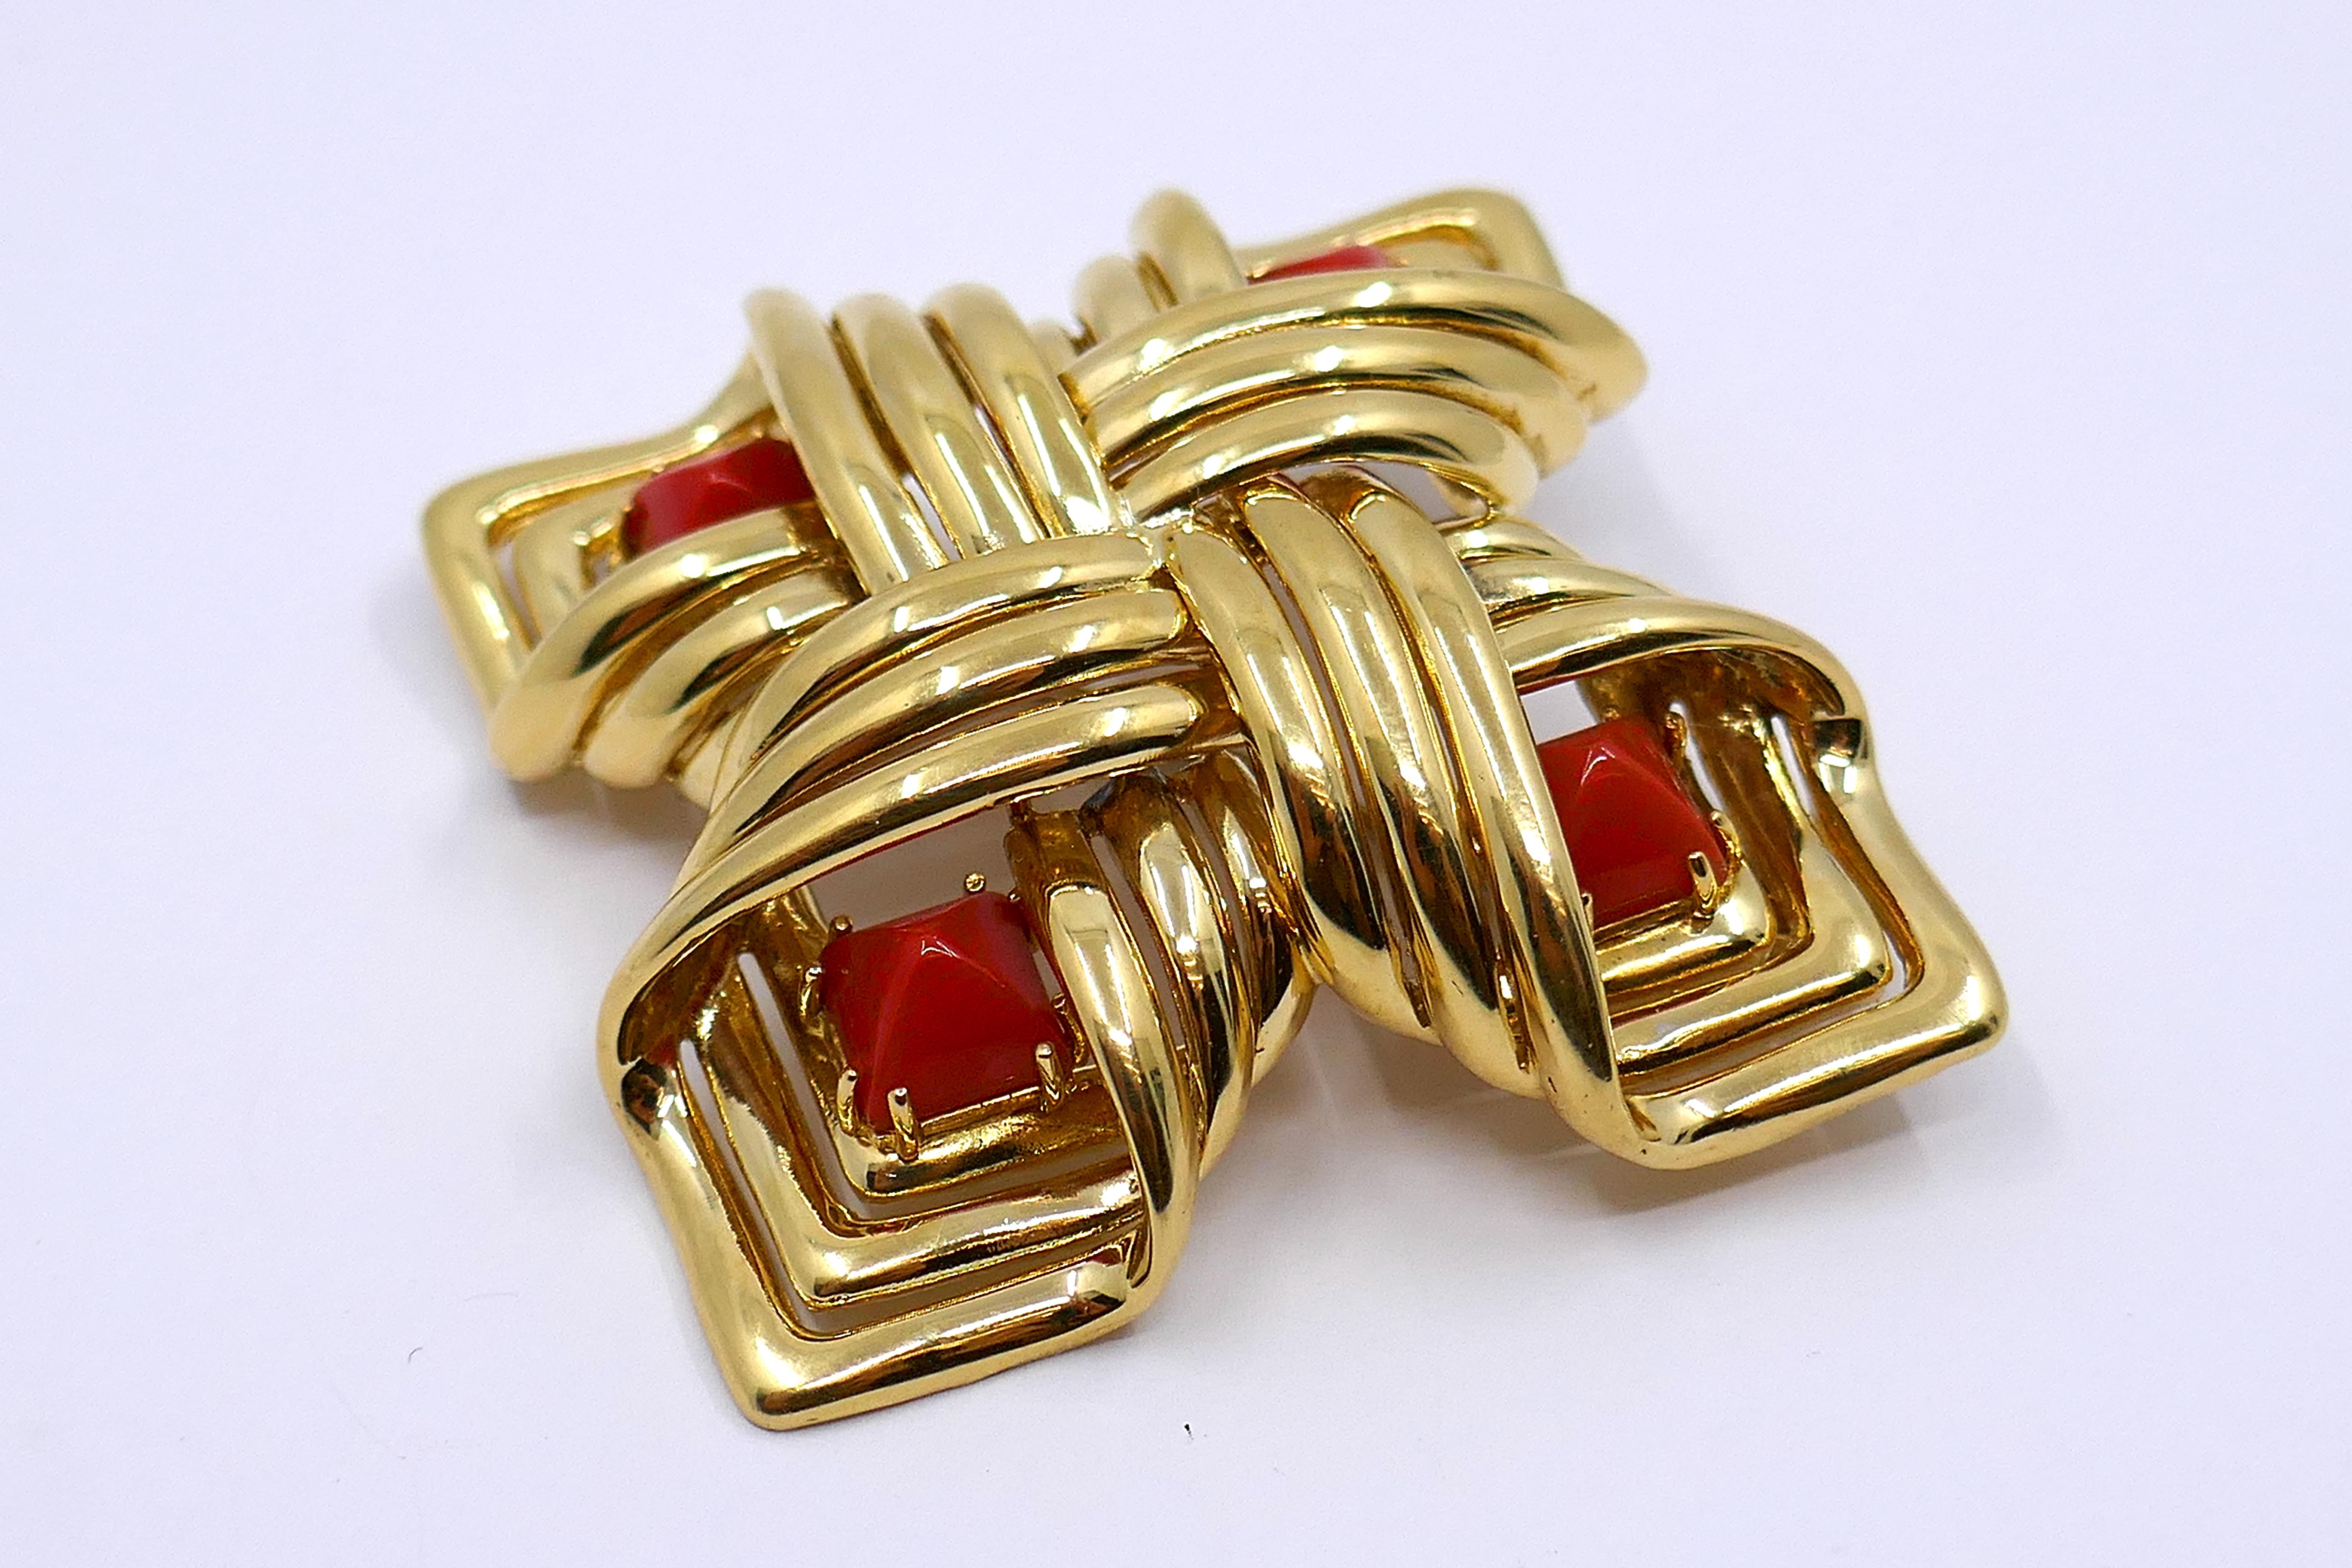 Square Cut 1980s Tiffany & Co. 18k Gold Coral Brooch